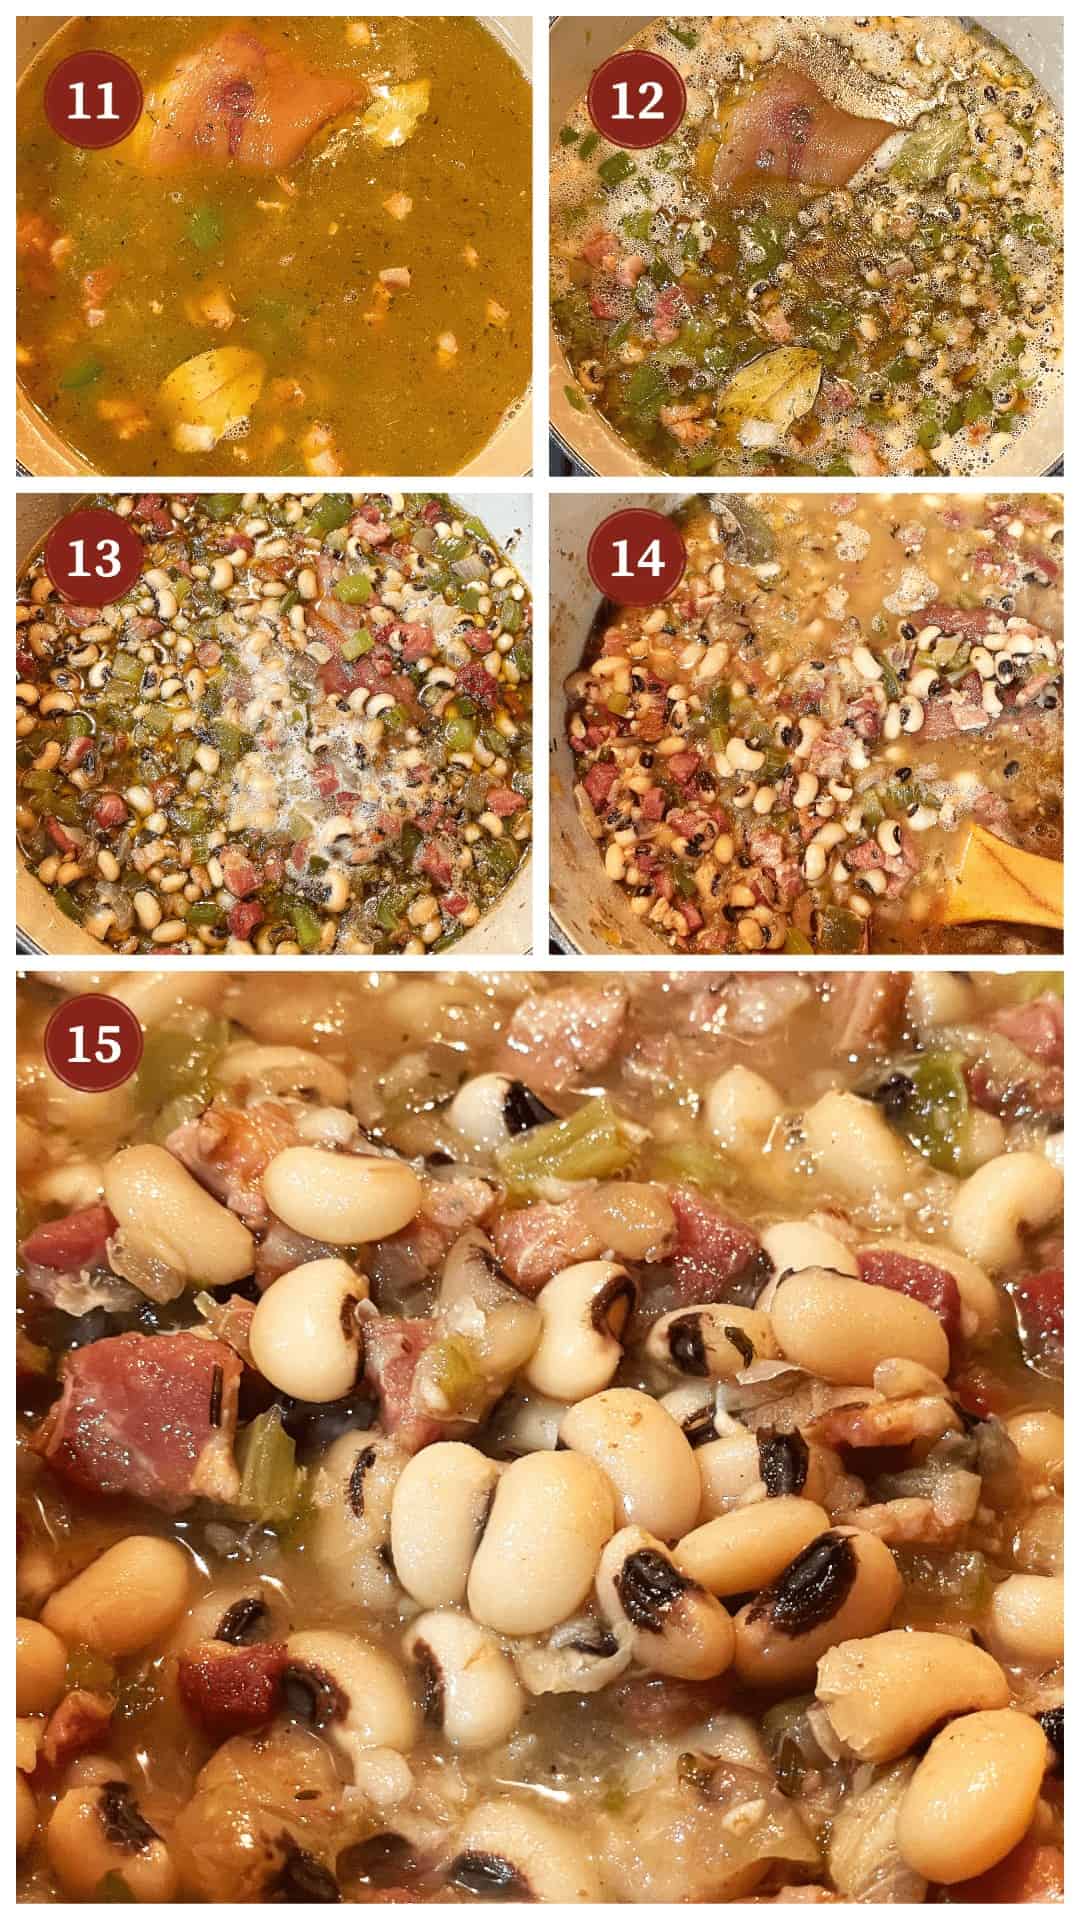 A collage of images showing how to make hoppin john, steps 11 - 15.